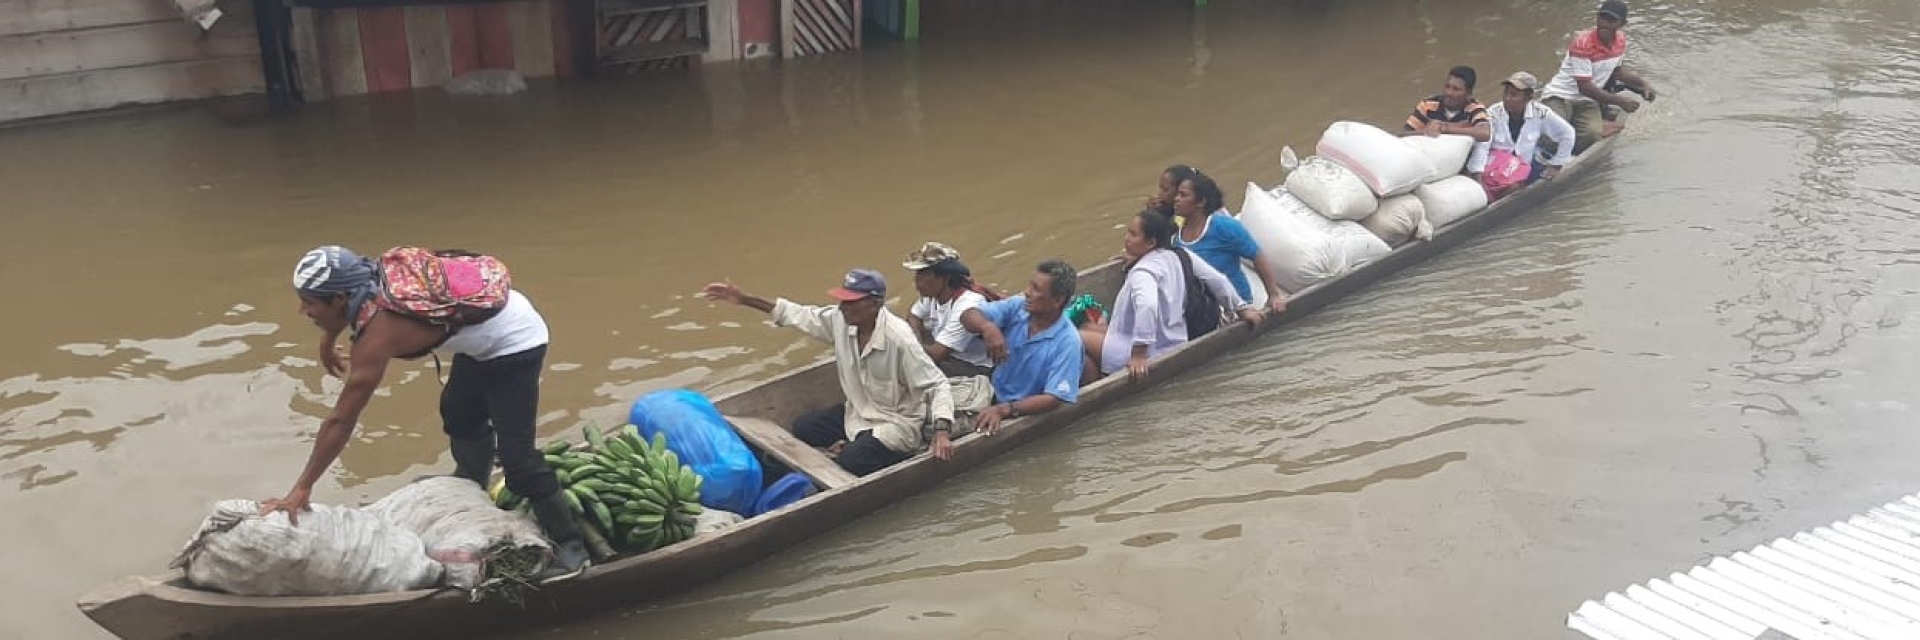 People escape in a boat as their homes are washed away by flooding caused by a hurricane